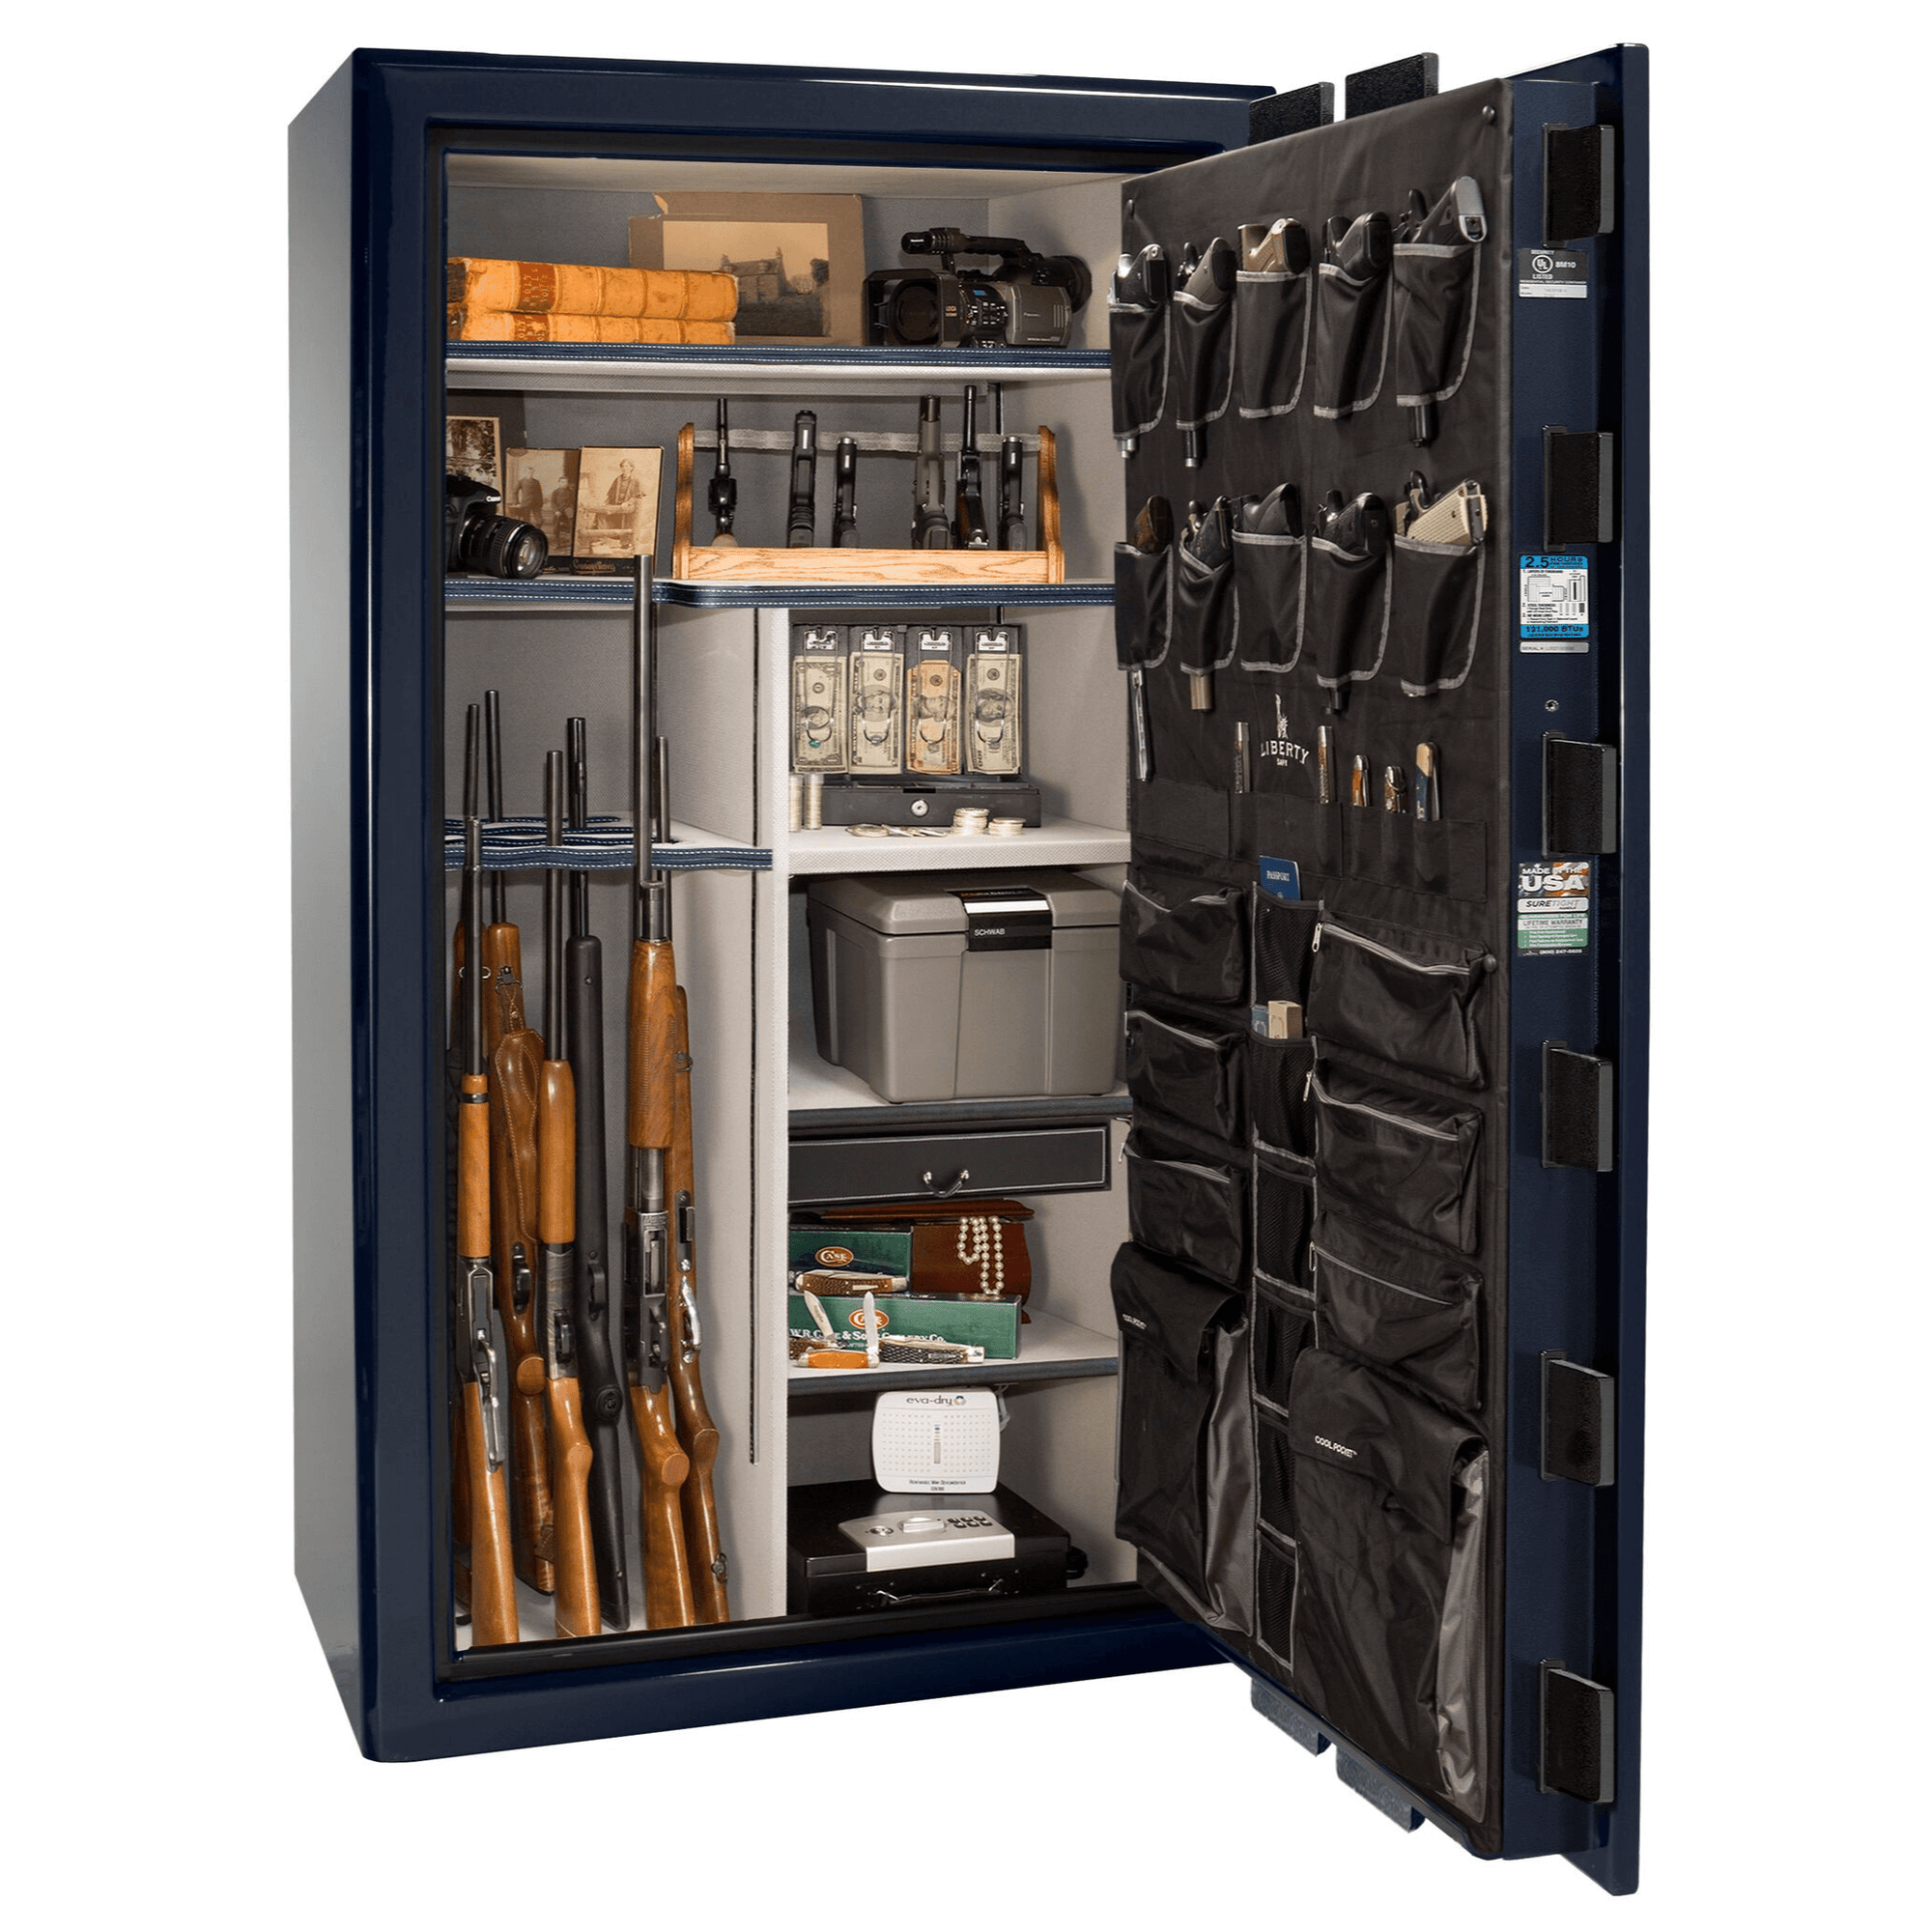 Presidential | 50 | Level 8 Security | 150 Minute Fire Protection | Blue Gloss | Chrome Electronic Lock | 72.5"(H) x 42"(W) x 32"(D)